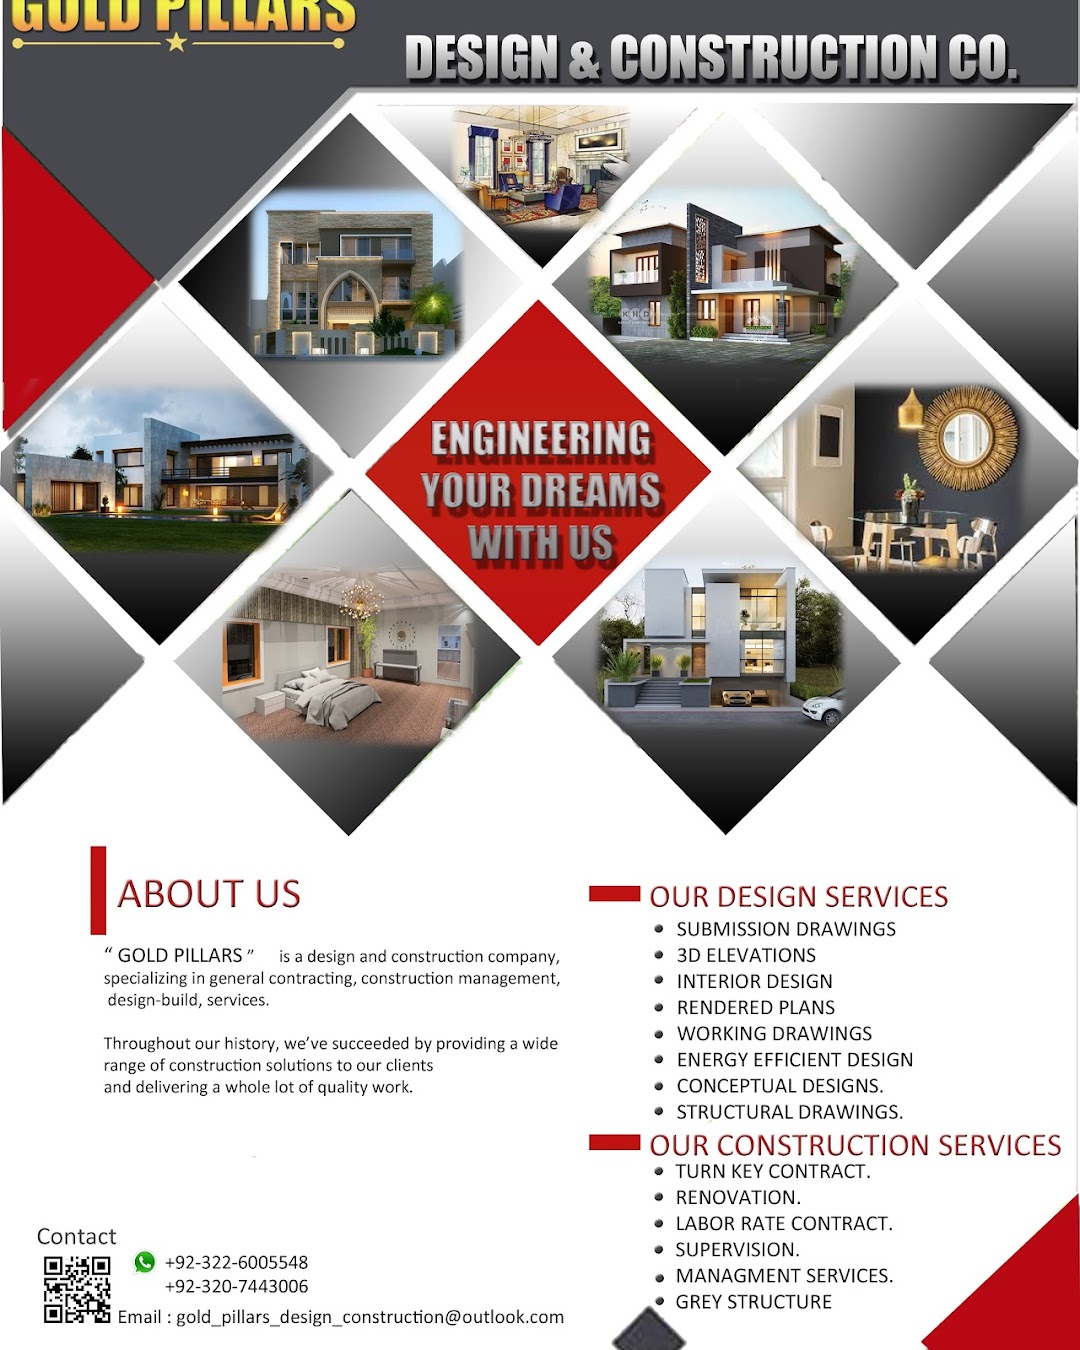 Gold Pillars Building Design and construction company